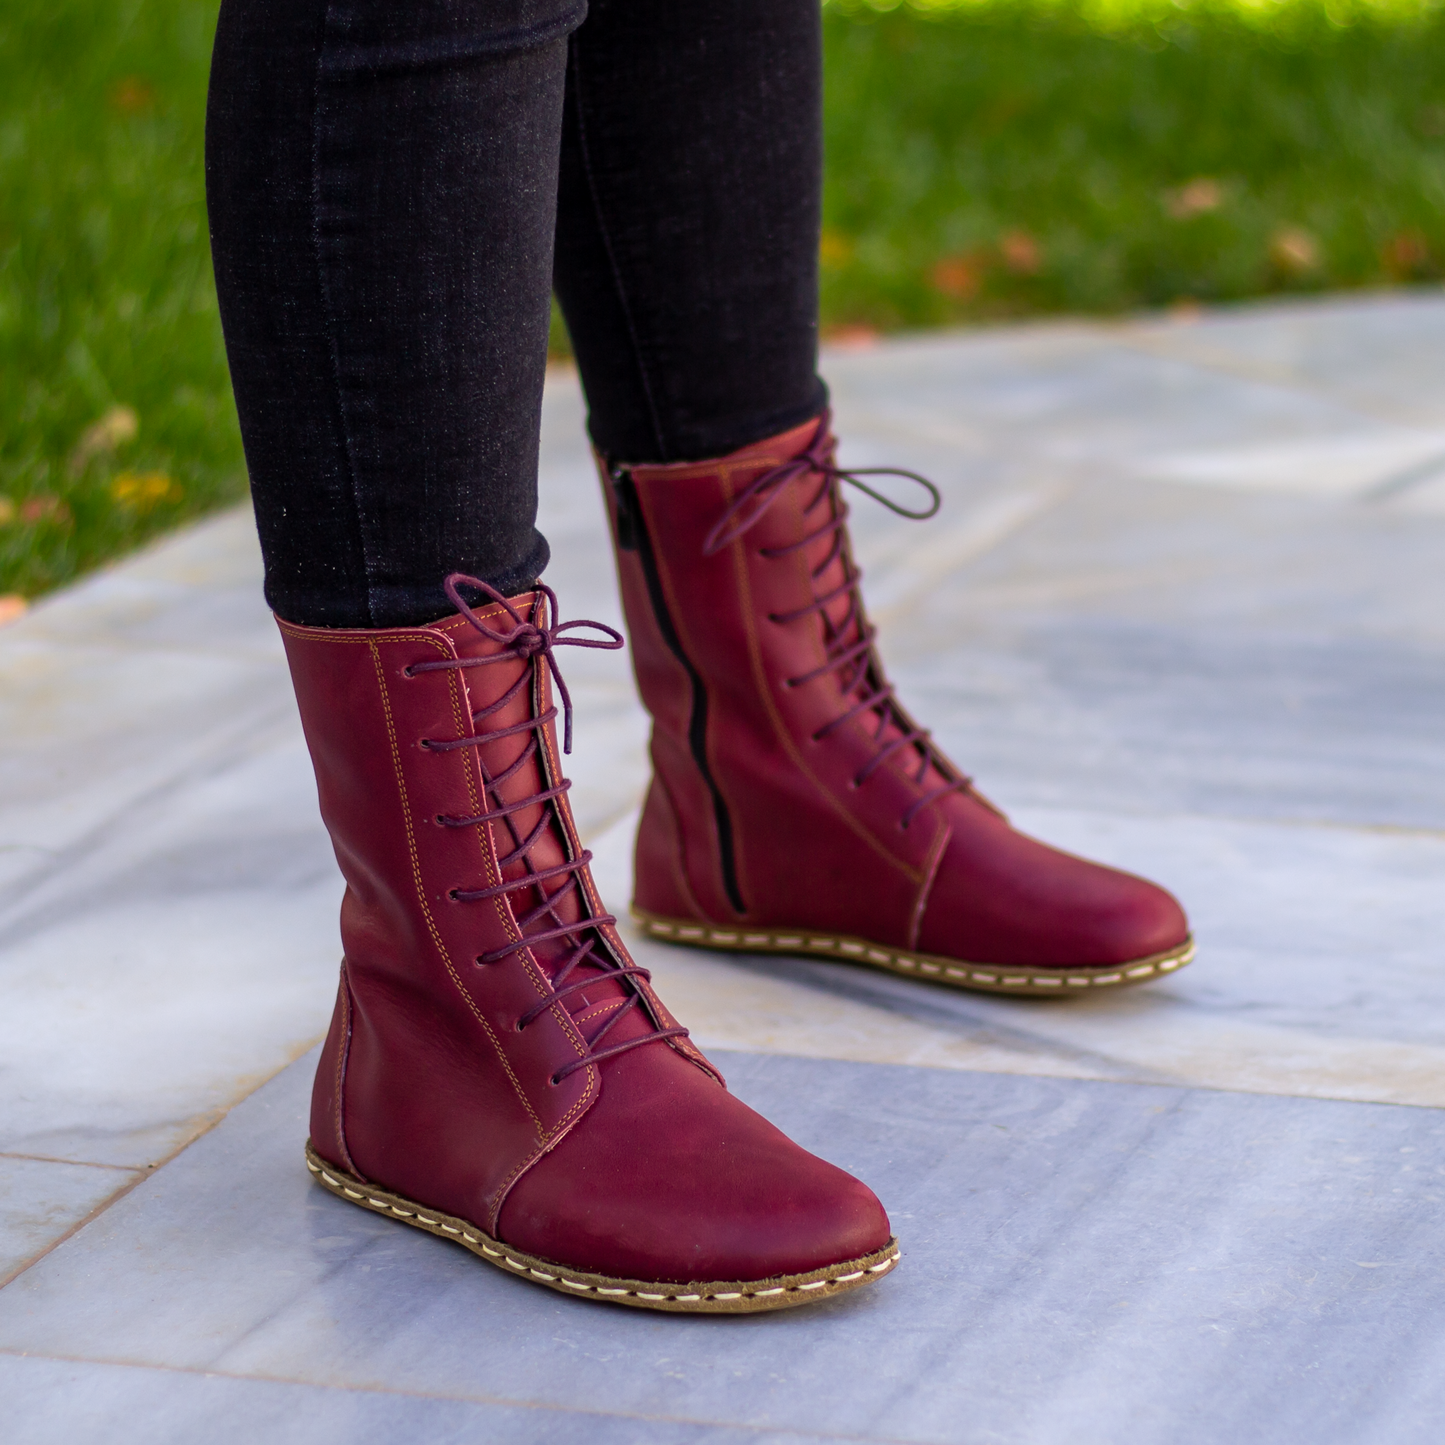 Grounding Copper Rivet | Barefoot Women Boot | Earthing Leather Boots | Buffalo Leather Outsole | Crazy Burgundy